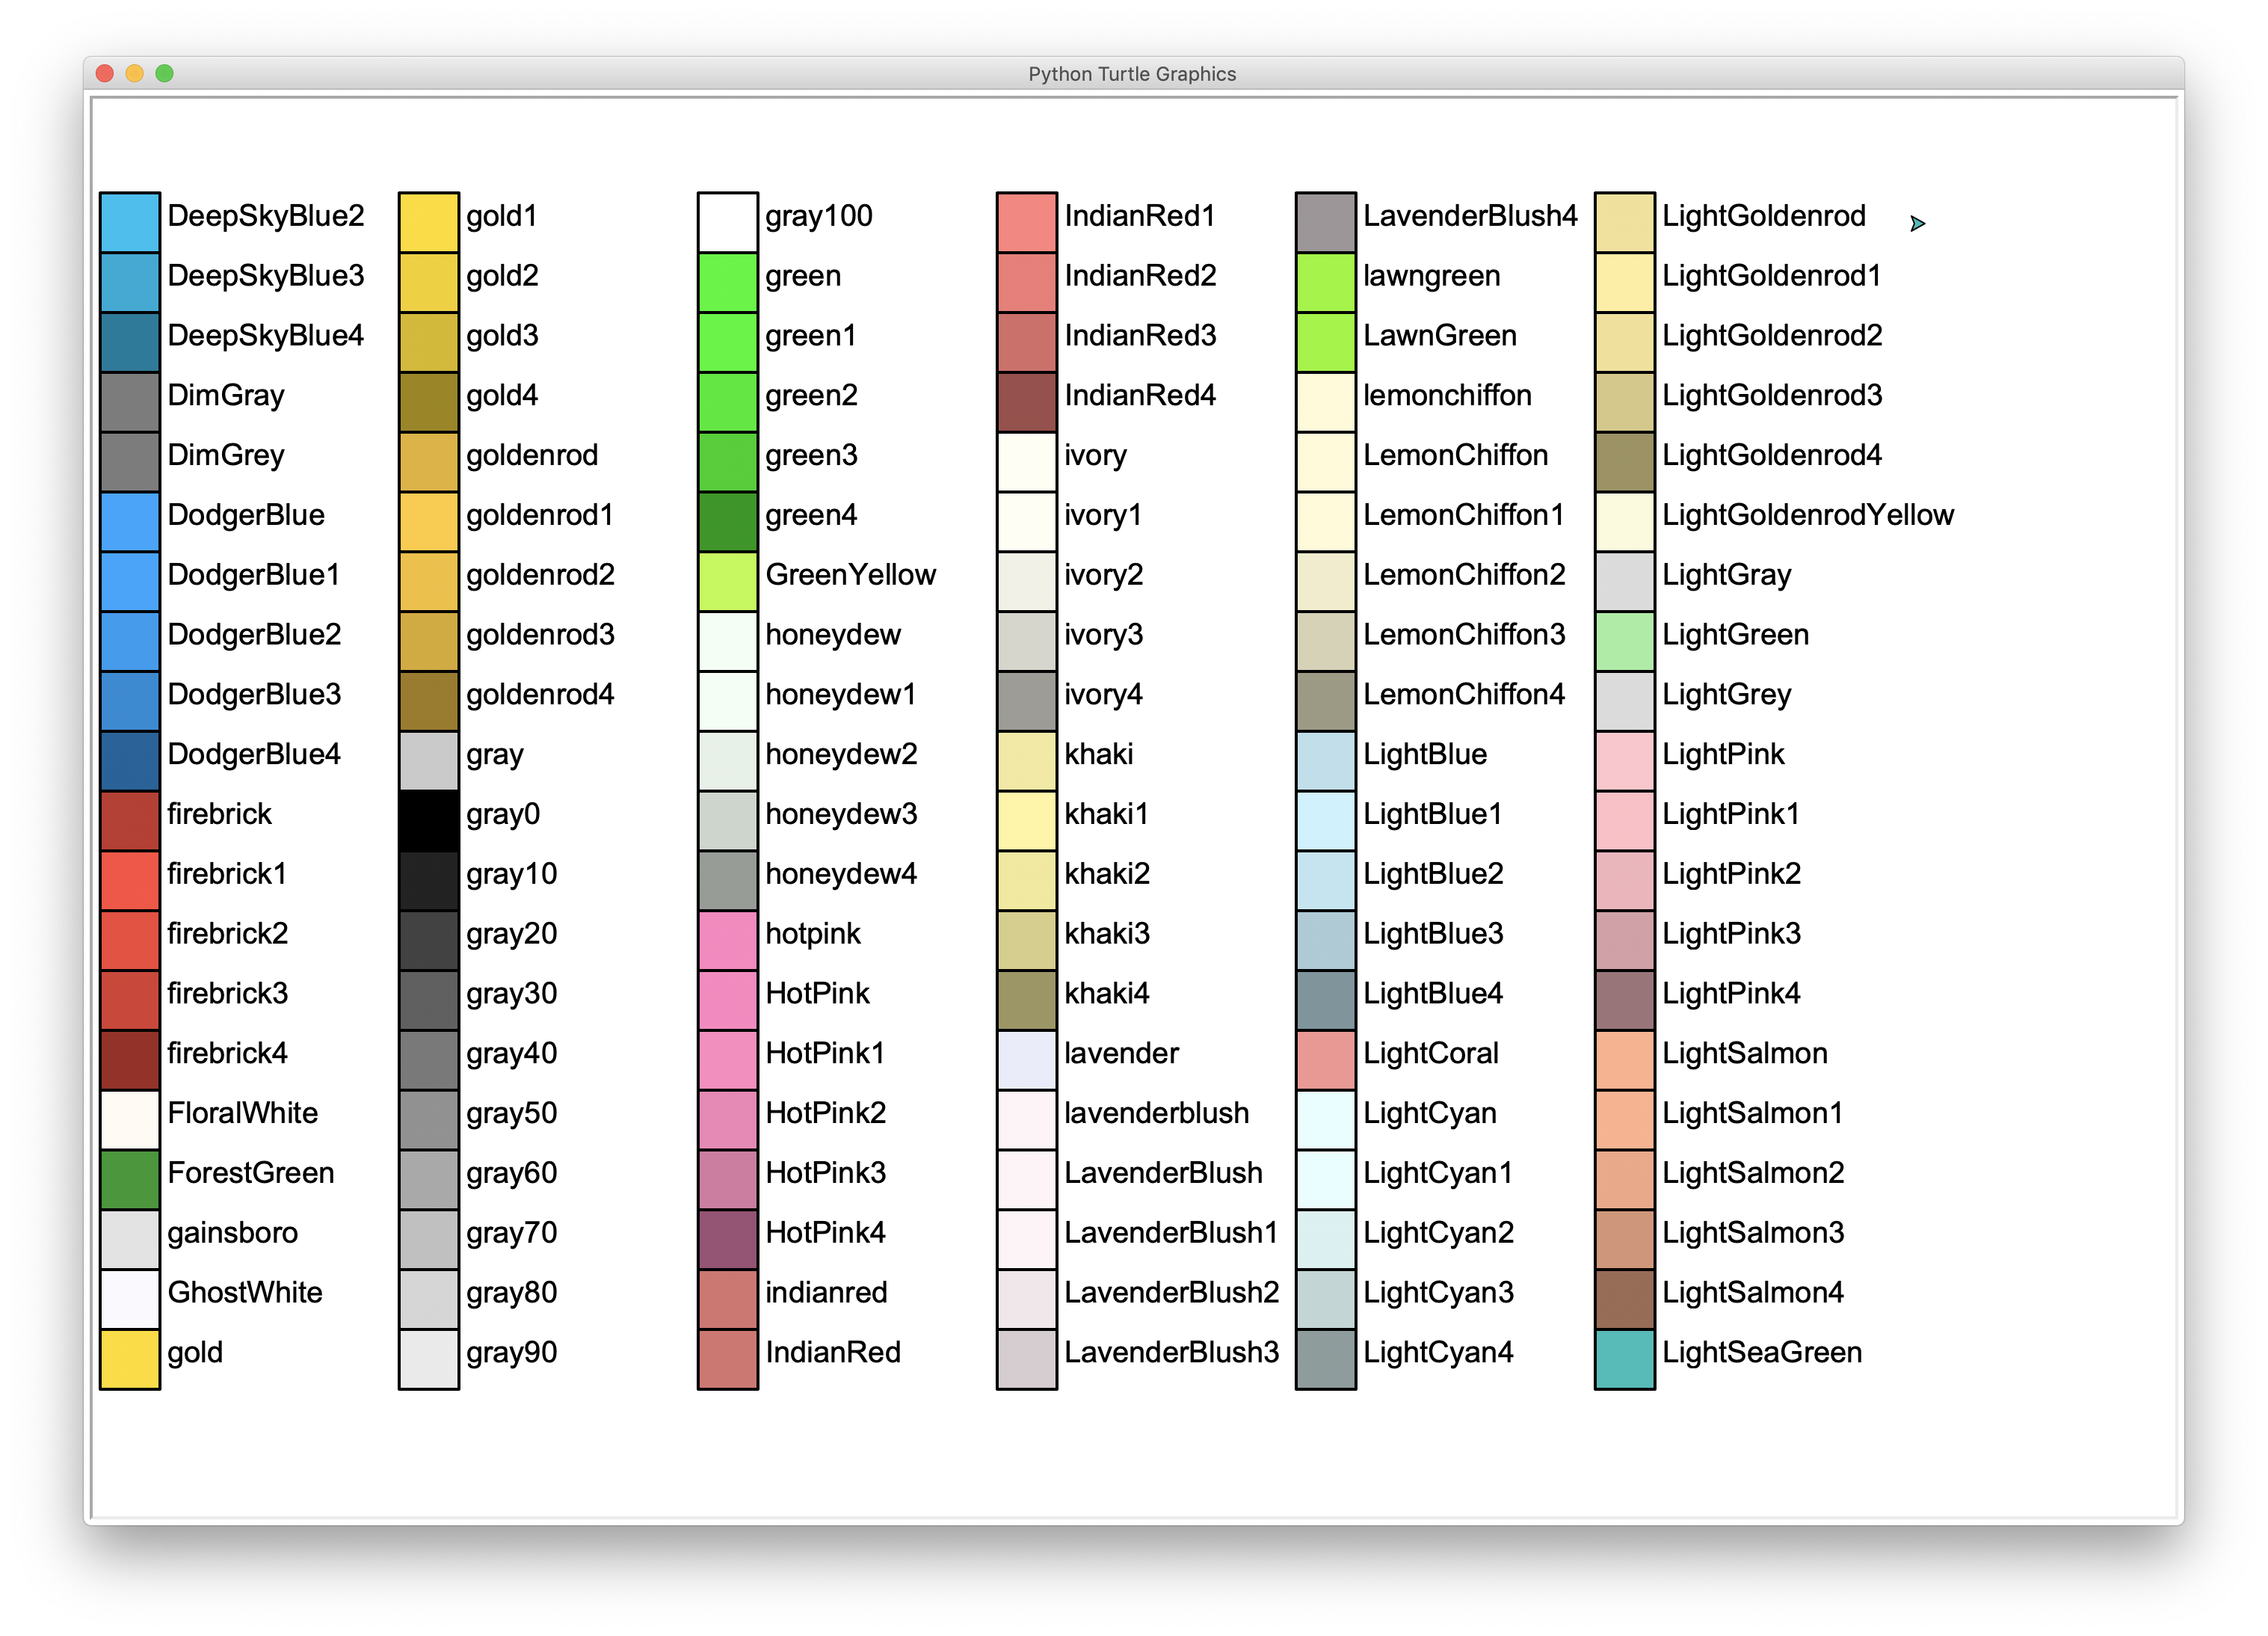 Another page of color names next to squares of color.